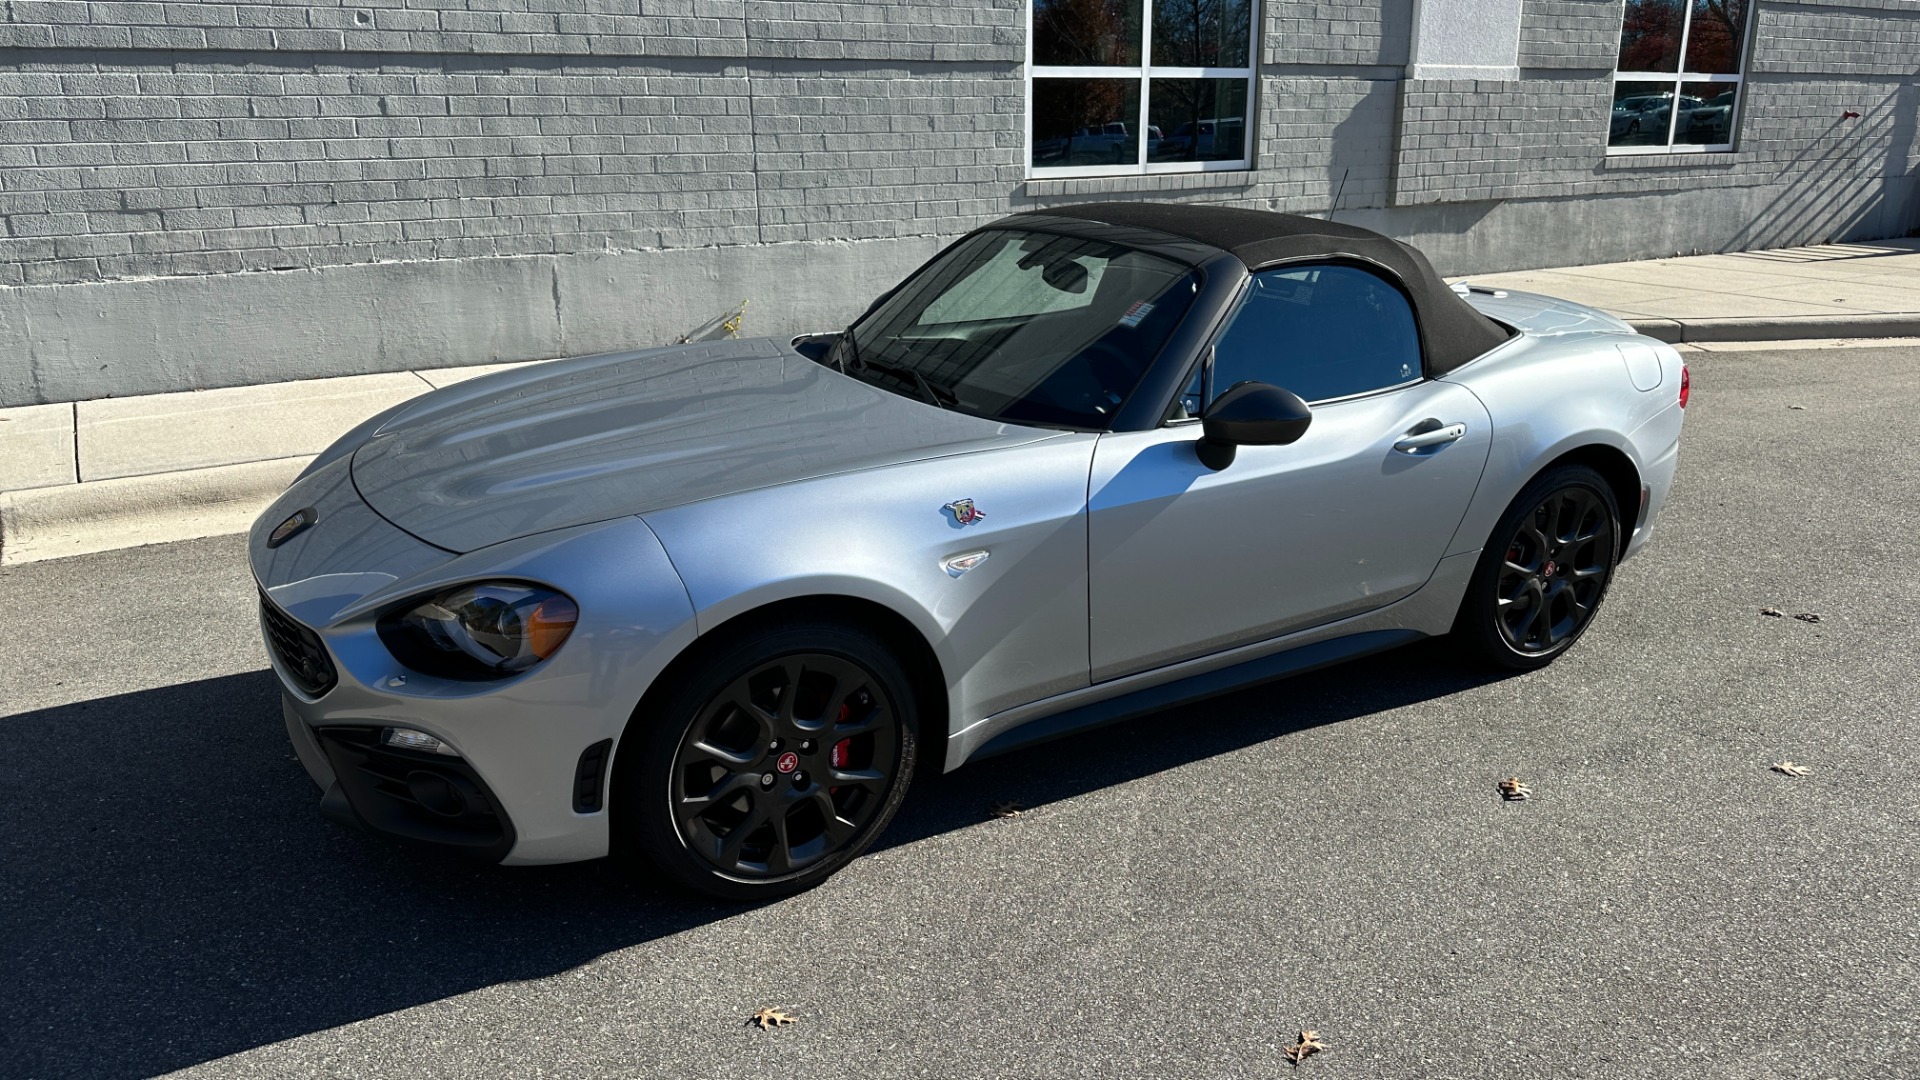 Used 2020 FIAT 124 Spider ARBARTH / MONZA EXHAUST / RECARO SPORT SEATS / BREMBO BRAKES / 6 SPEED for sale $29,995 at Formula Imports in Charlotte NC 28227 5